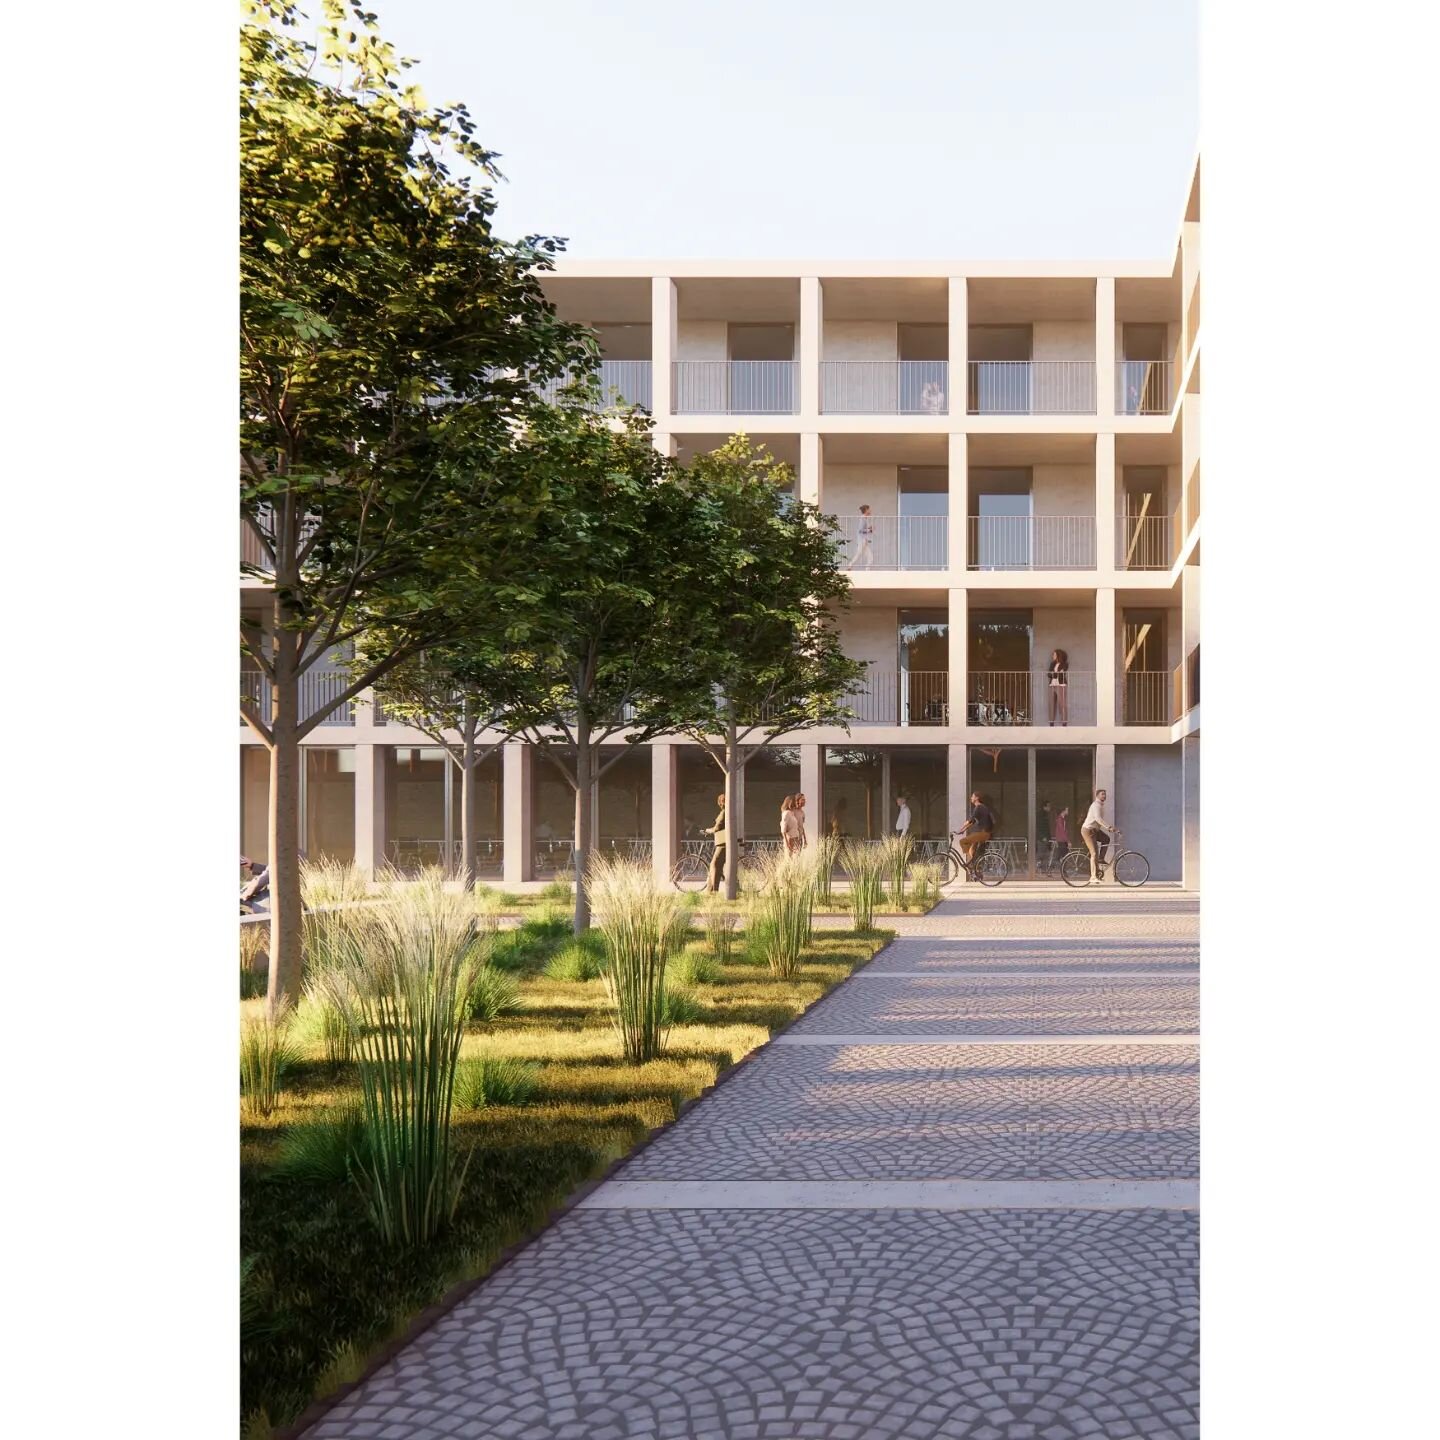 A project for the design of a mixed-use development including 35 high end apartments. The L shaped plan facing south, south westwards, allows each of the units to avail of natural light throughout the day. A shared garden and communal area exist with